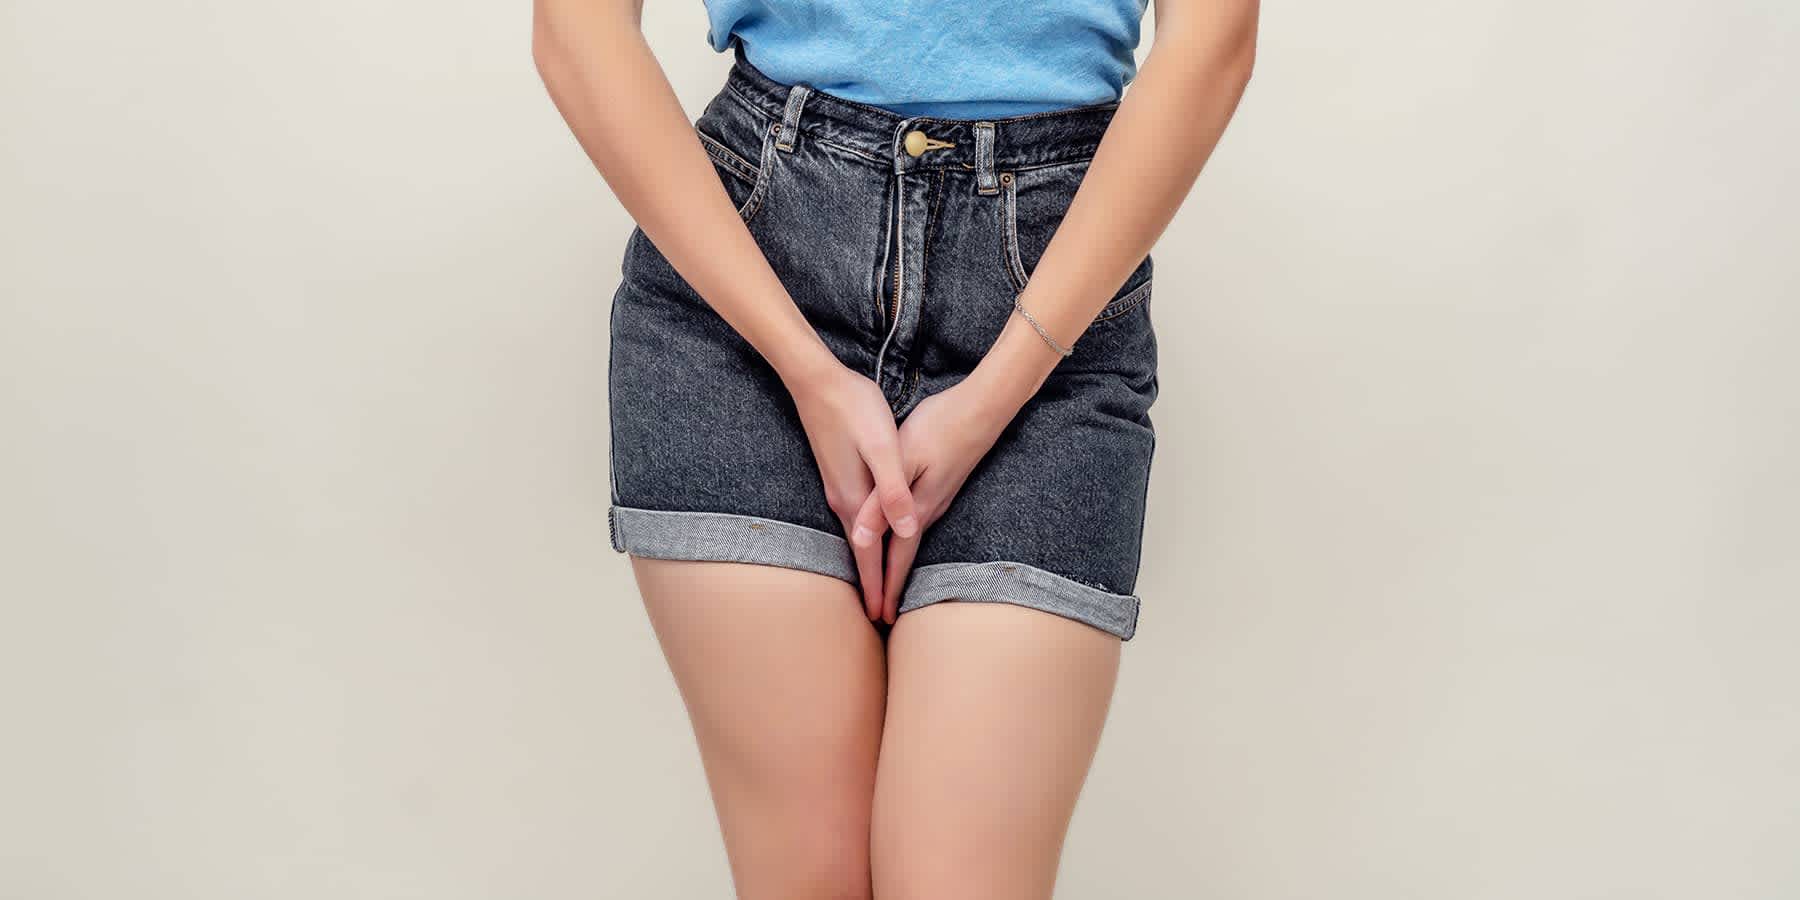 Woman in shorts wondering if you can have sex with a yeast infection